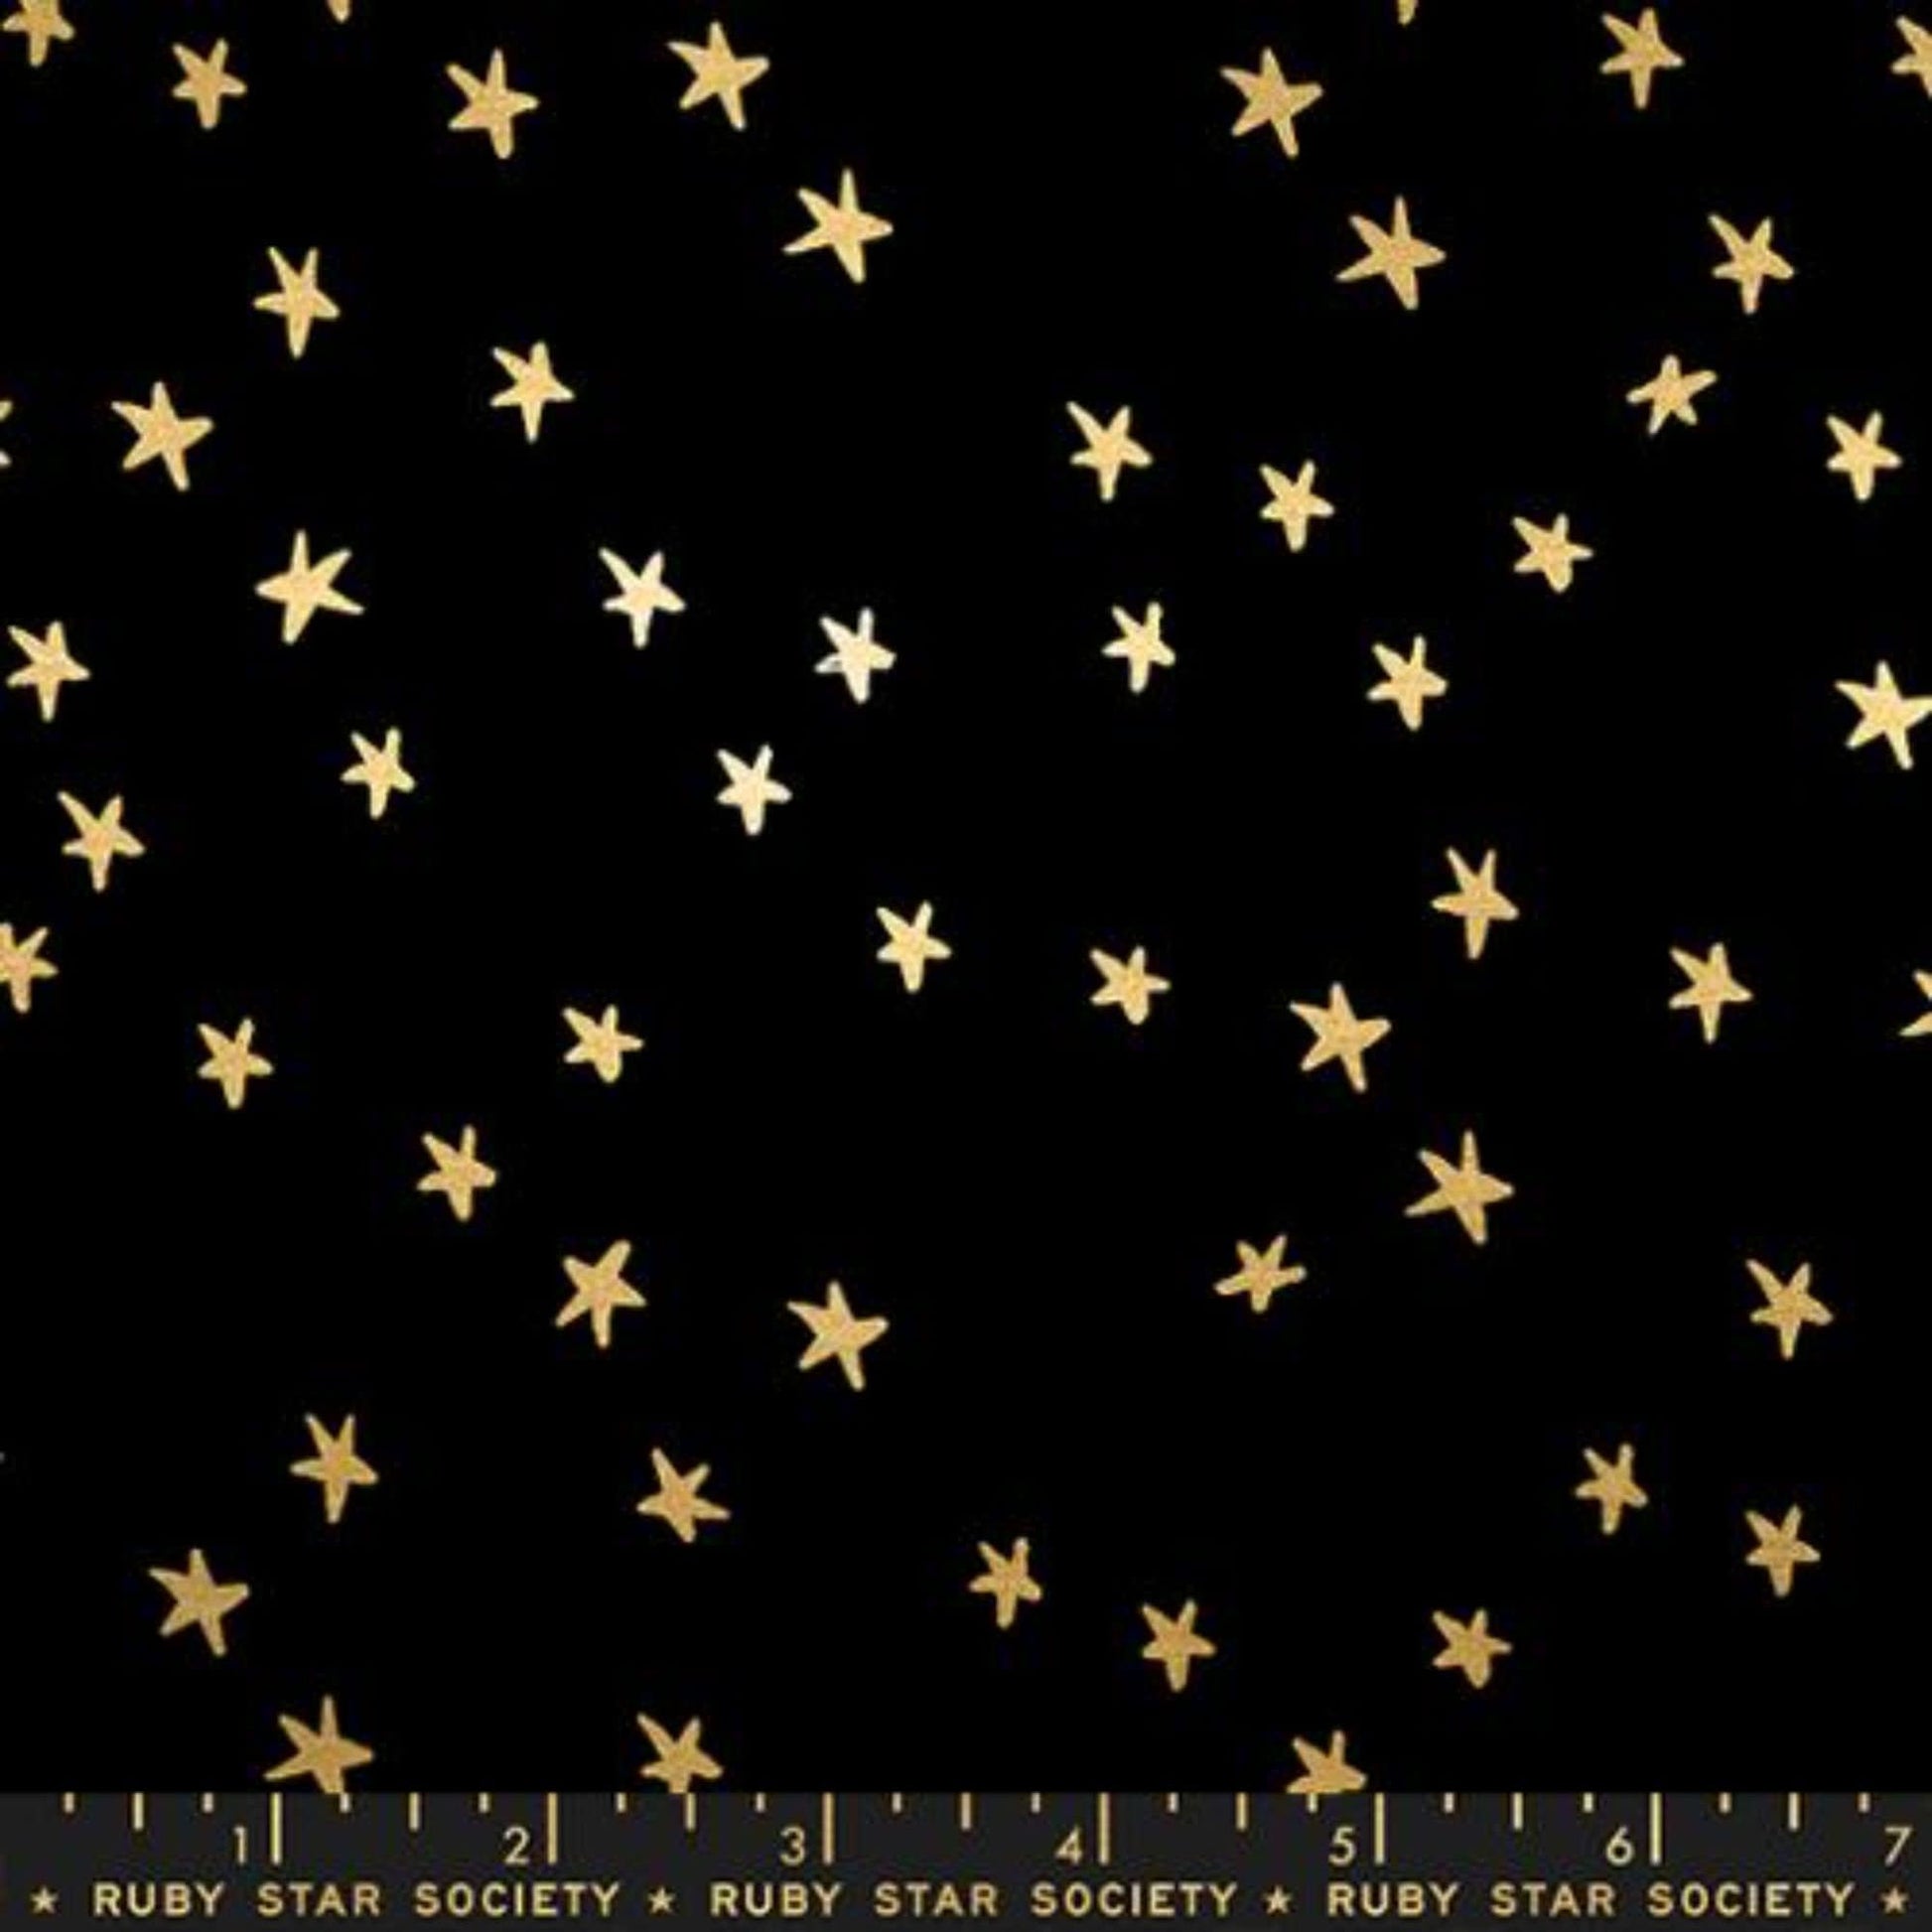 Starry Black Gold METALLIC Starry Alexia Abegg Ruby Star Society Fabric Moda 100% Quilters Cotton RS4109 50M Fabric Fetish